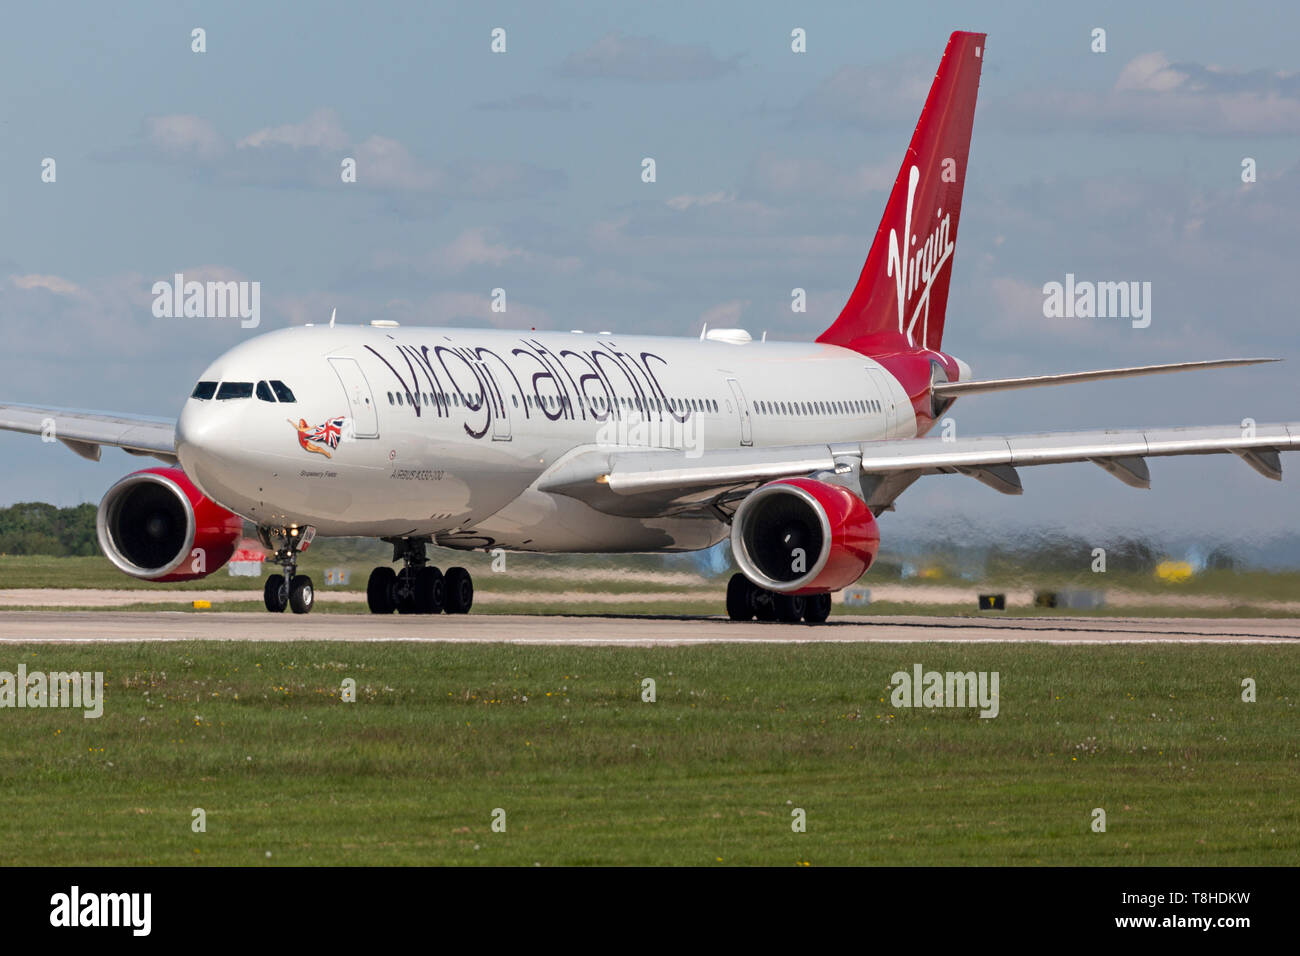 Virgin Atlantic Airways Airbus A330, registration G-VLNM preparing for take off at Manchester Airport, England. Stock Photo